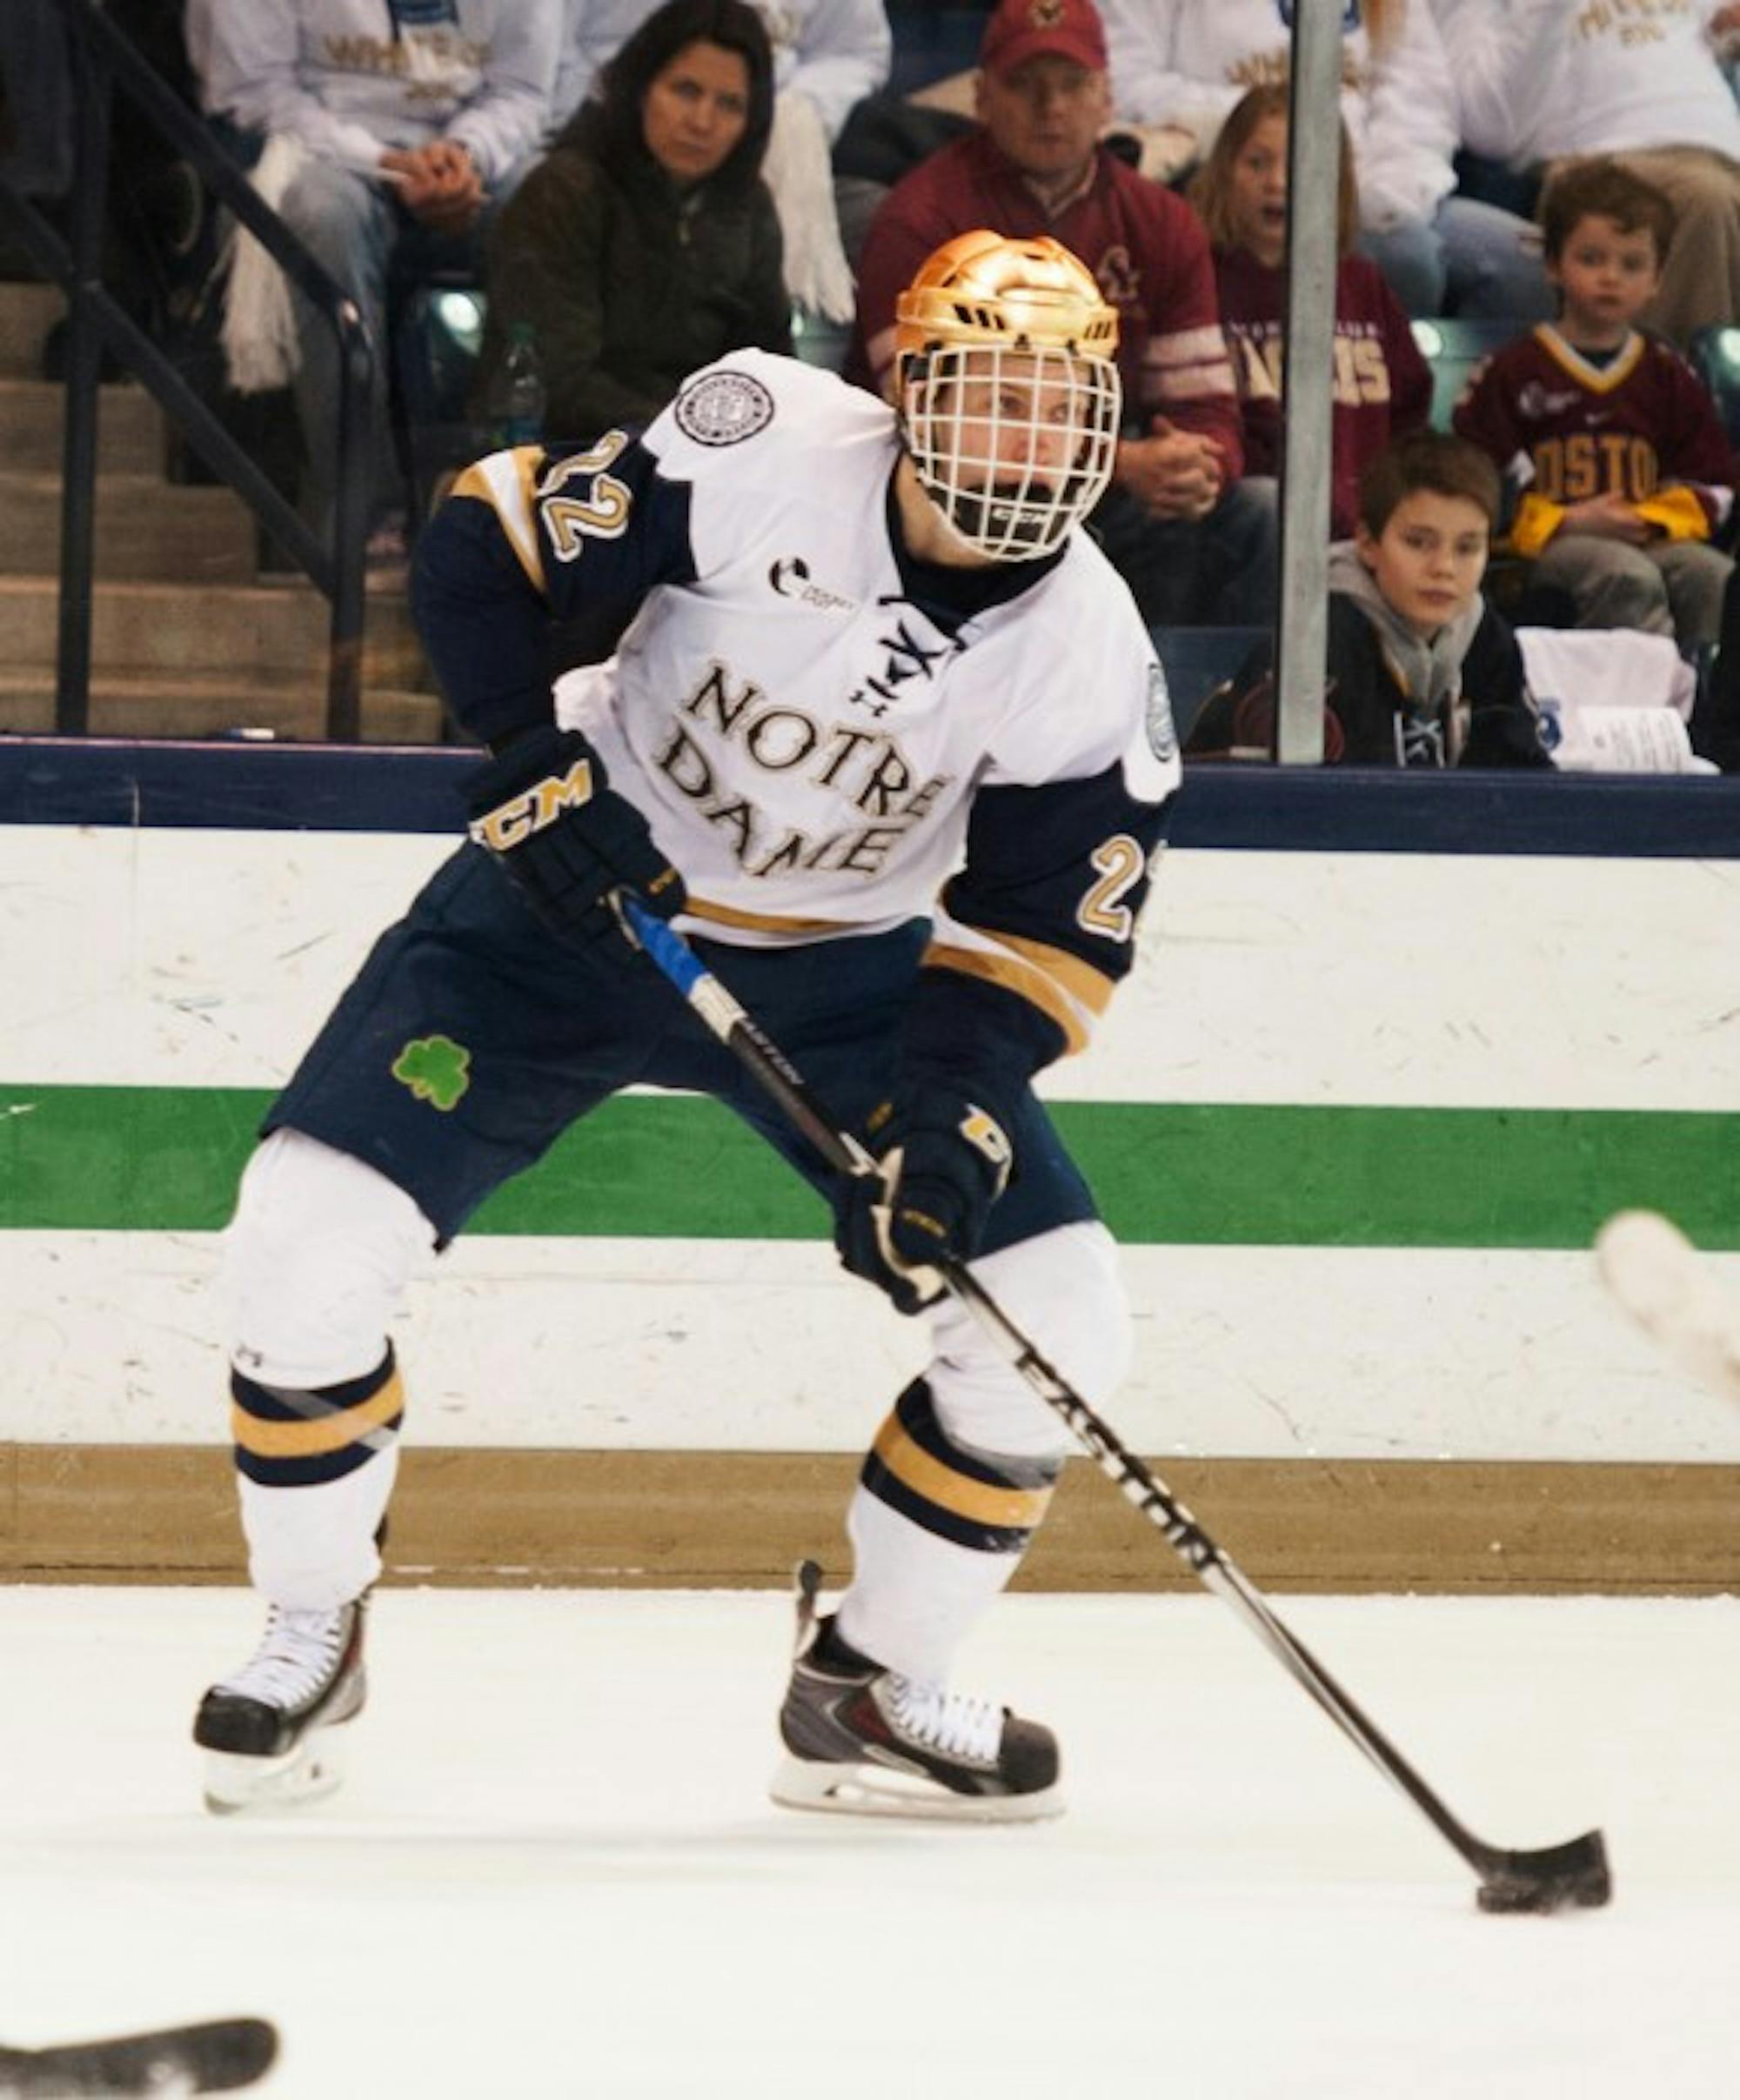 Senior left wing Mario Lucia looks to pass during a 2-0 loss to Boston College on Feb. 27 at Compton  Family Ice Arena. The Irish host Northwestern for a pair of games Thursday and Friday this week.